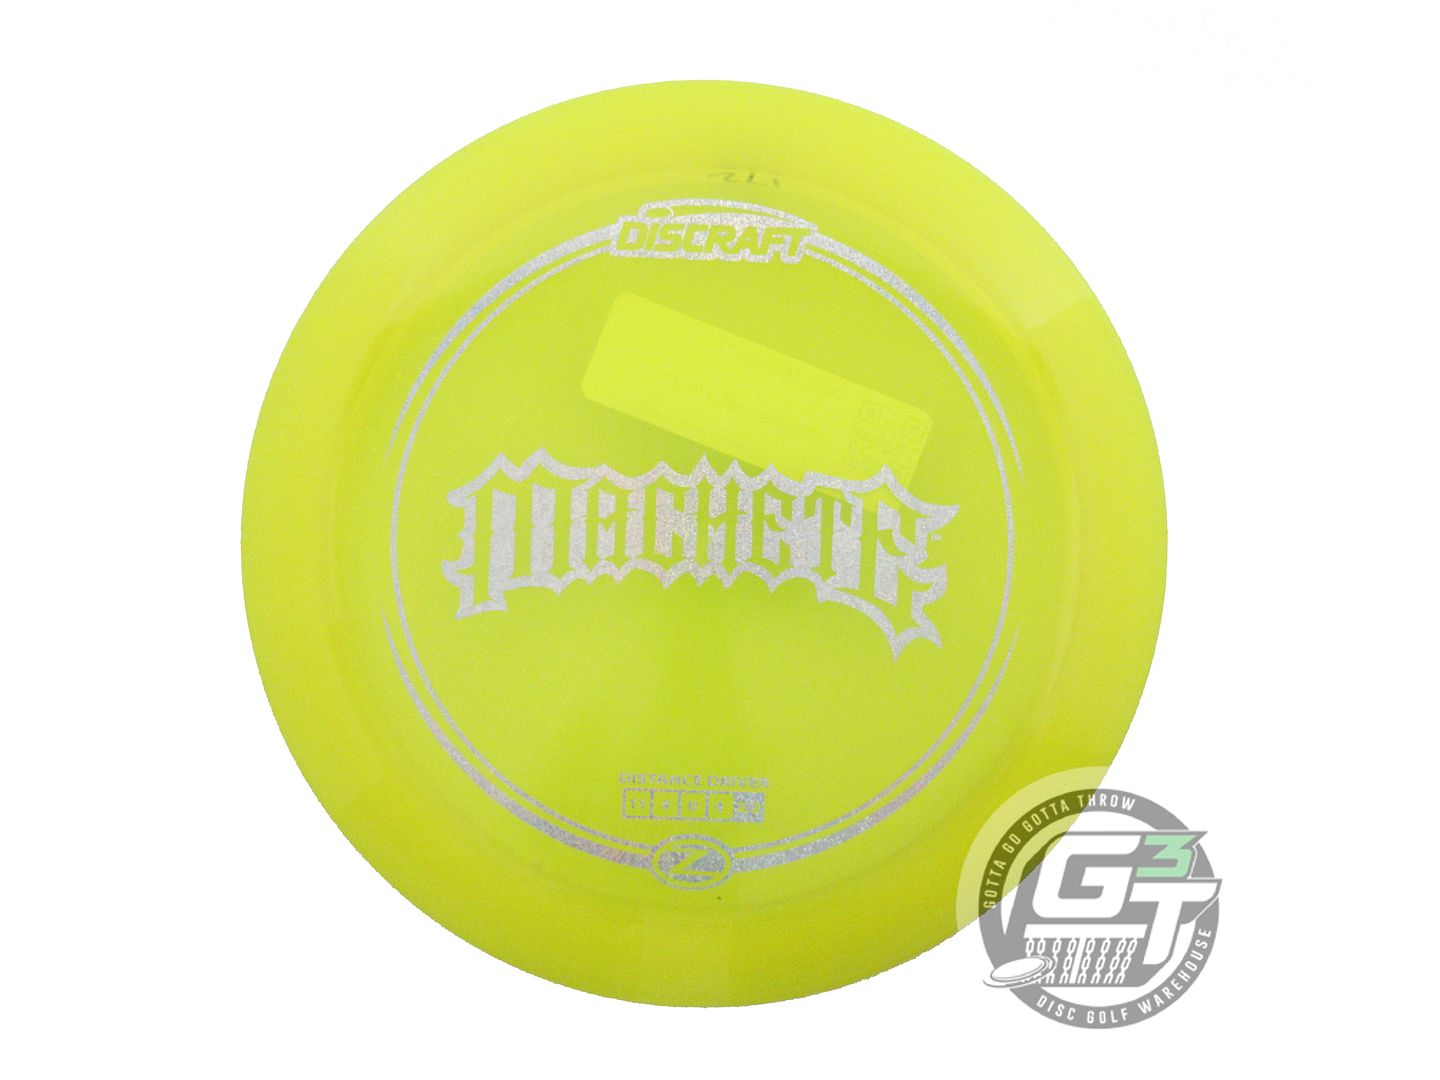 Discraft Elite Z Machete Distance Driver Golf Disc (Individually Listed)